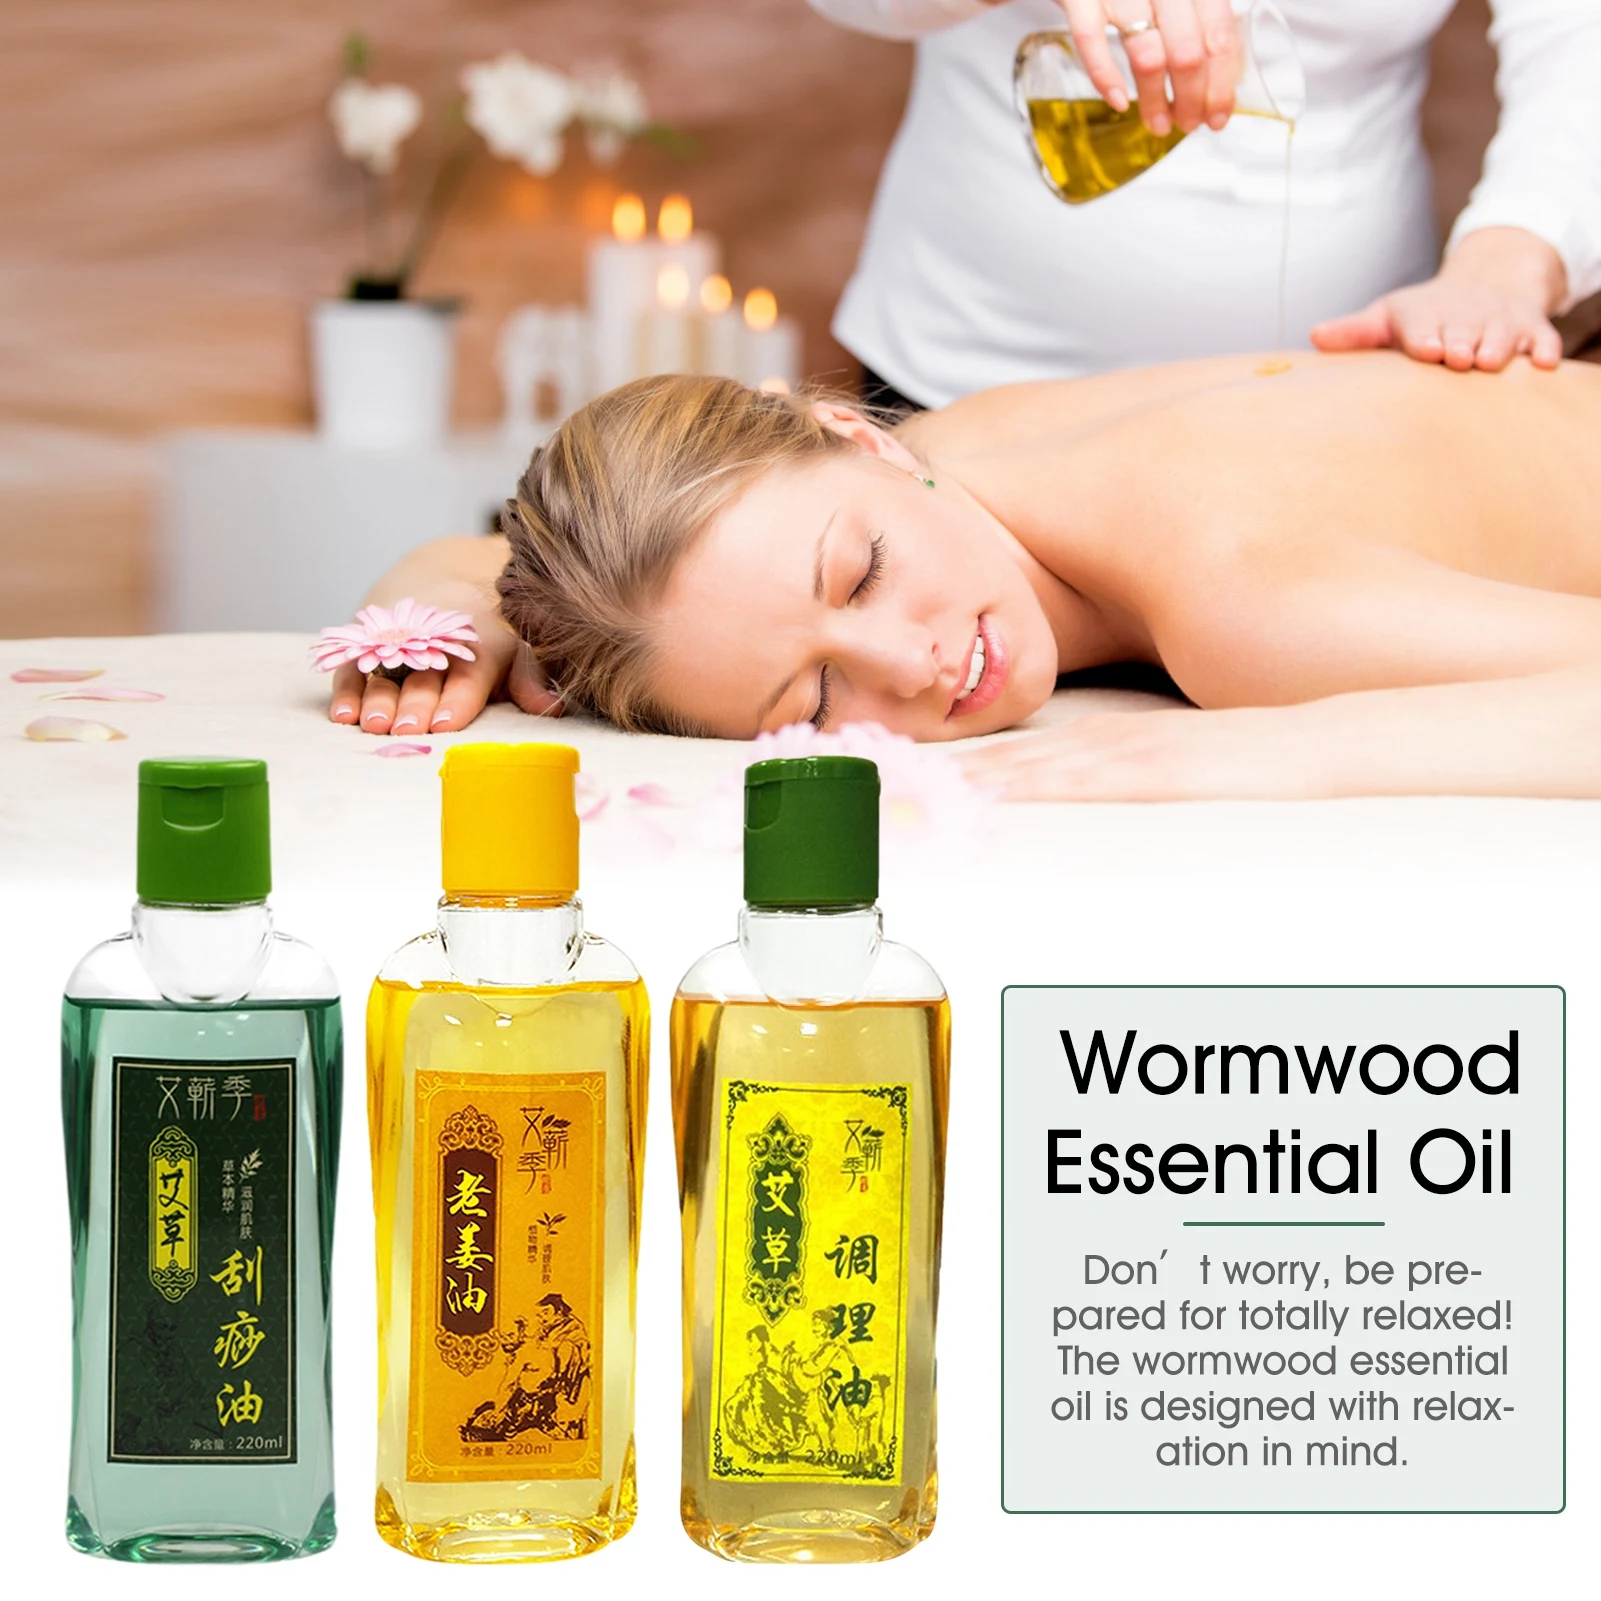 

220ml Wormwood Essential Oil Chinese Herbal Body Massage SPA Scrape Therapy for Relieve Stress